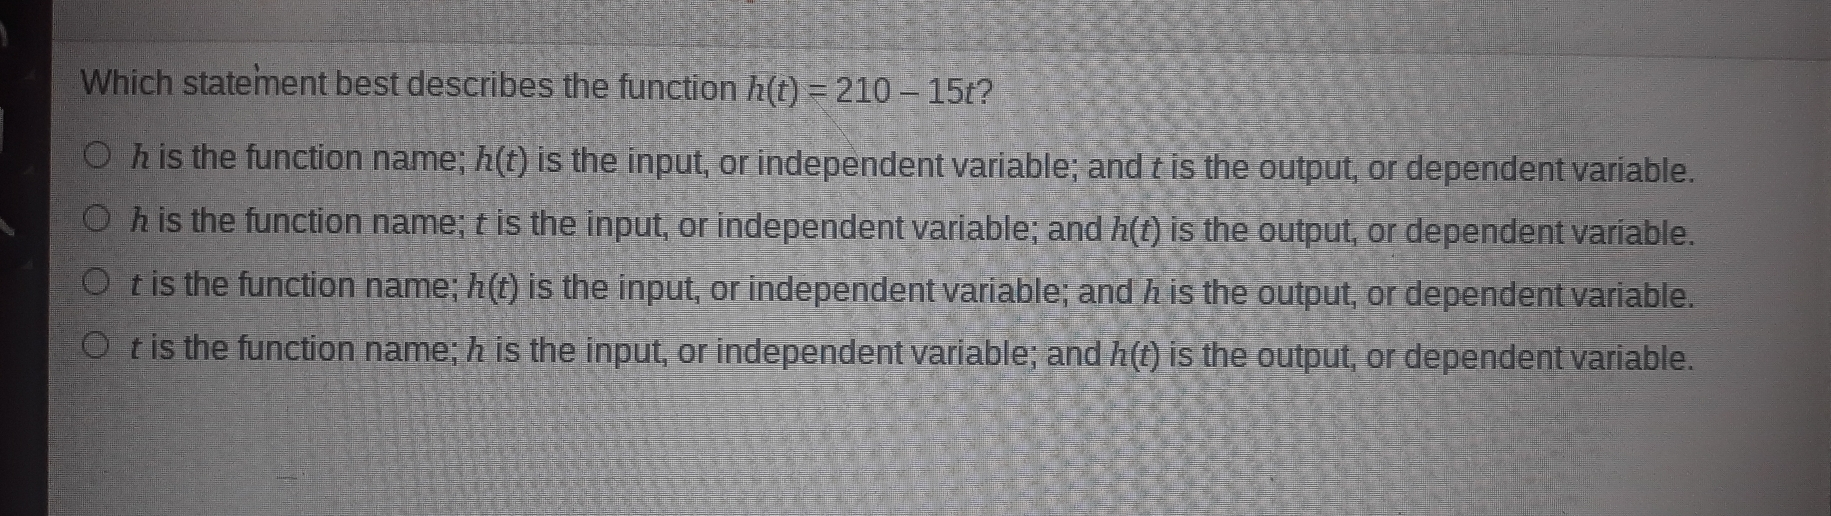 Which statement best describes the function ht=210-15t 2 h is the function name; ht is the input, or independent variable; and t is the output, or dependent variable. h is the function name; t is the input, or independent variable; and ht is the output, or dependent variable. t is the function name; ht is the input, or independent variable; and h is the output, or dependent variable. t is the function name; h is the input, or independent variable; and ht is the output, or dependent variable.